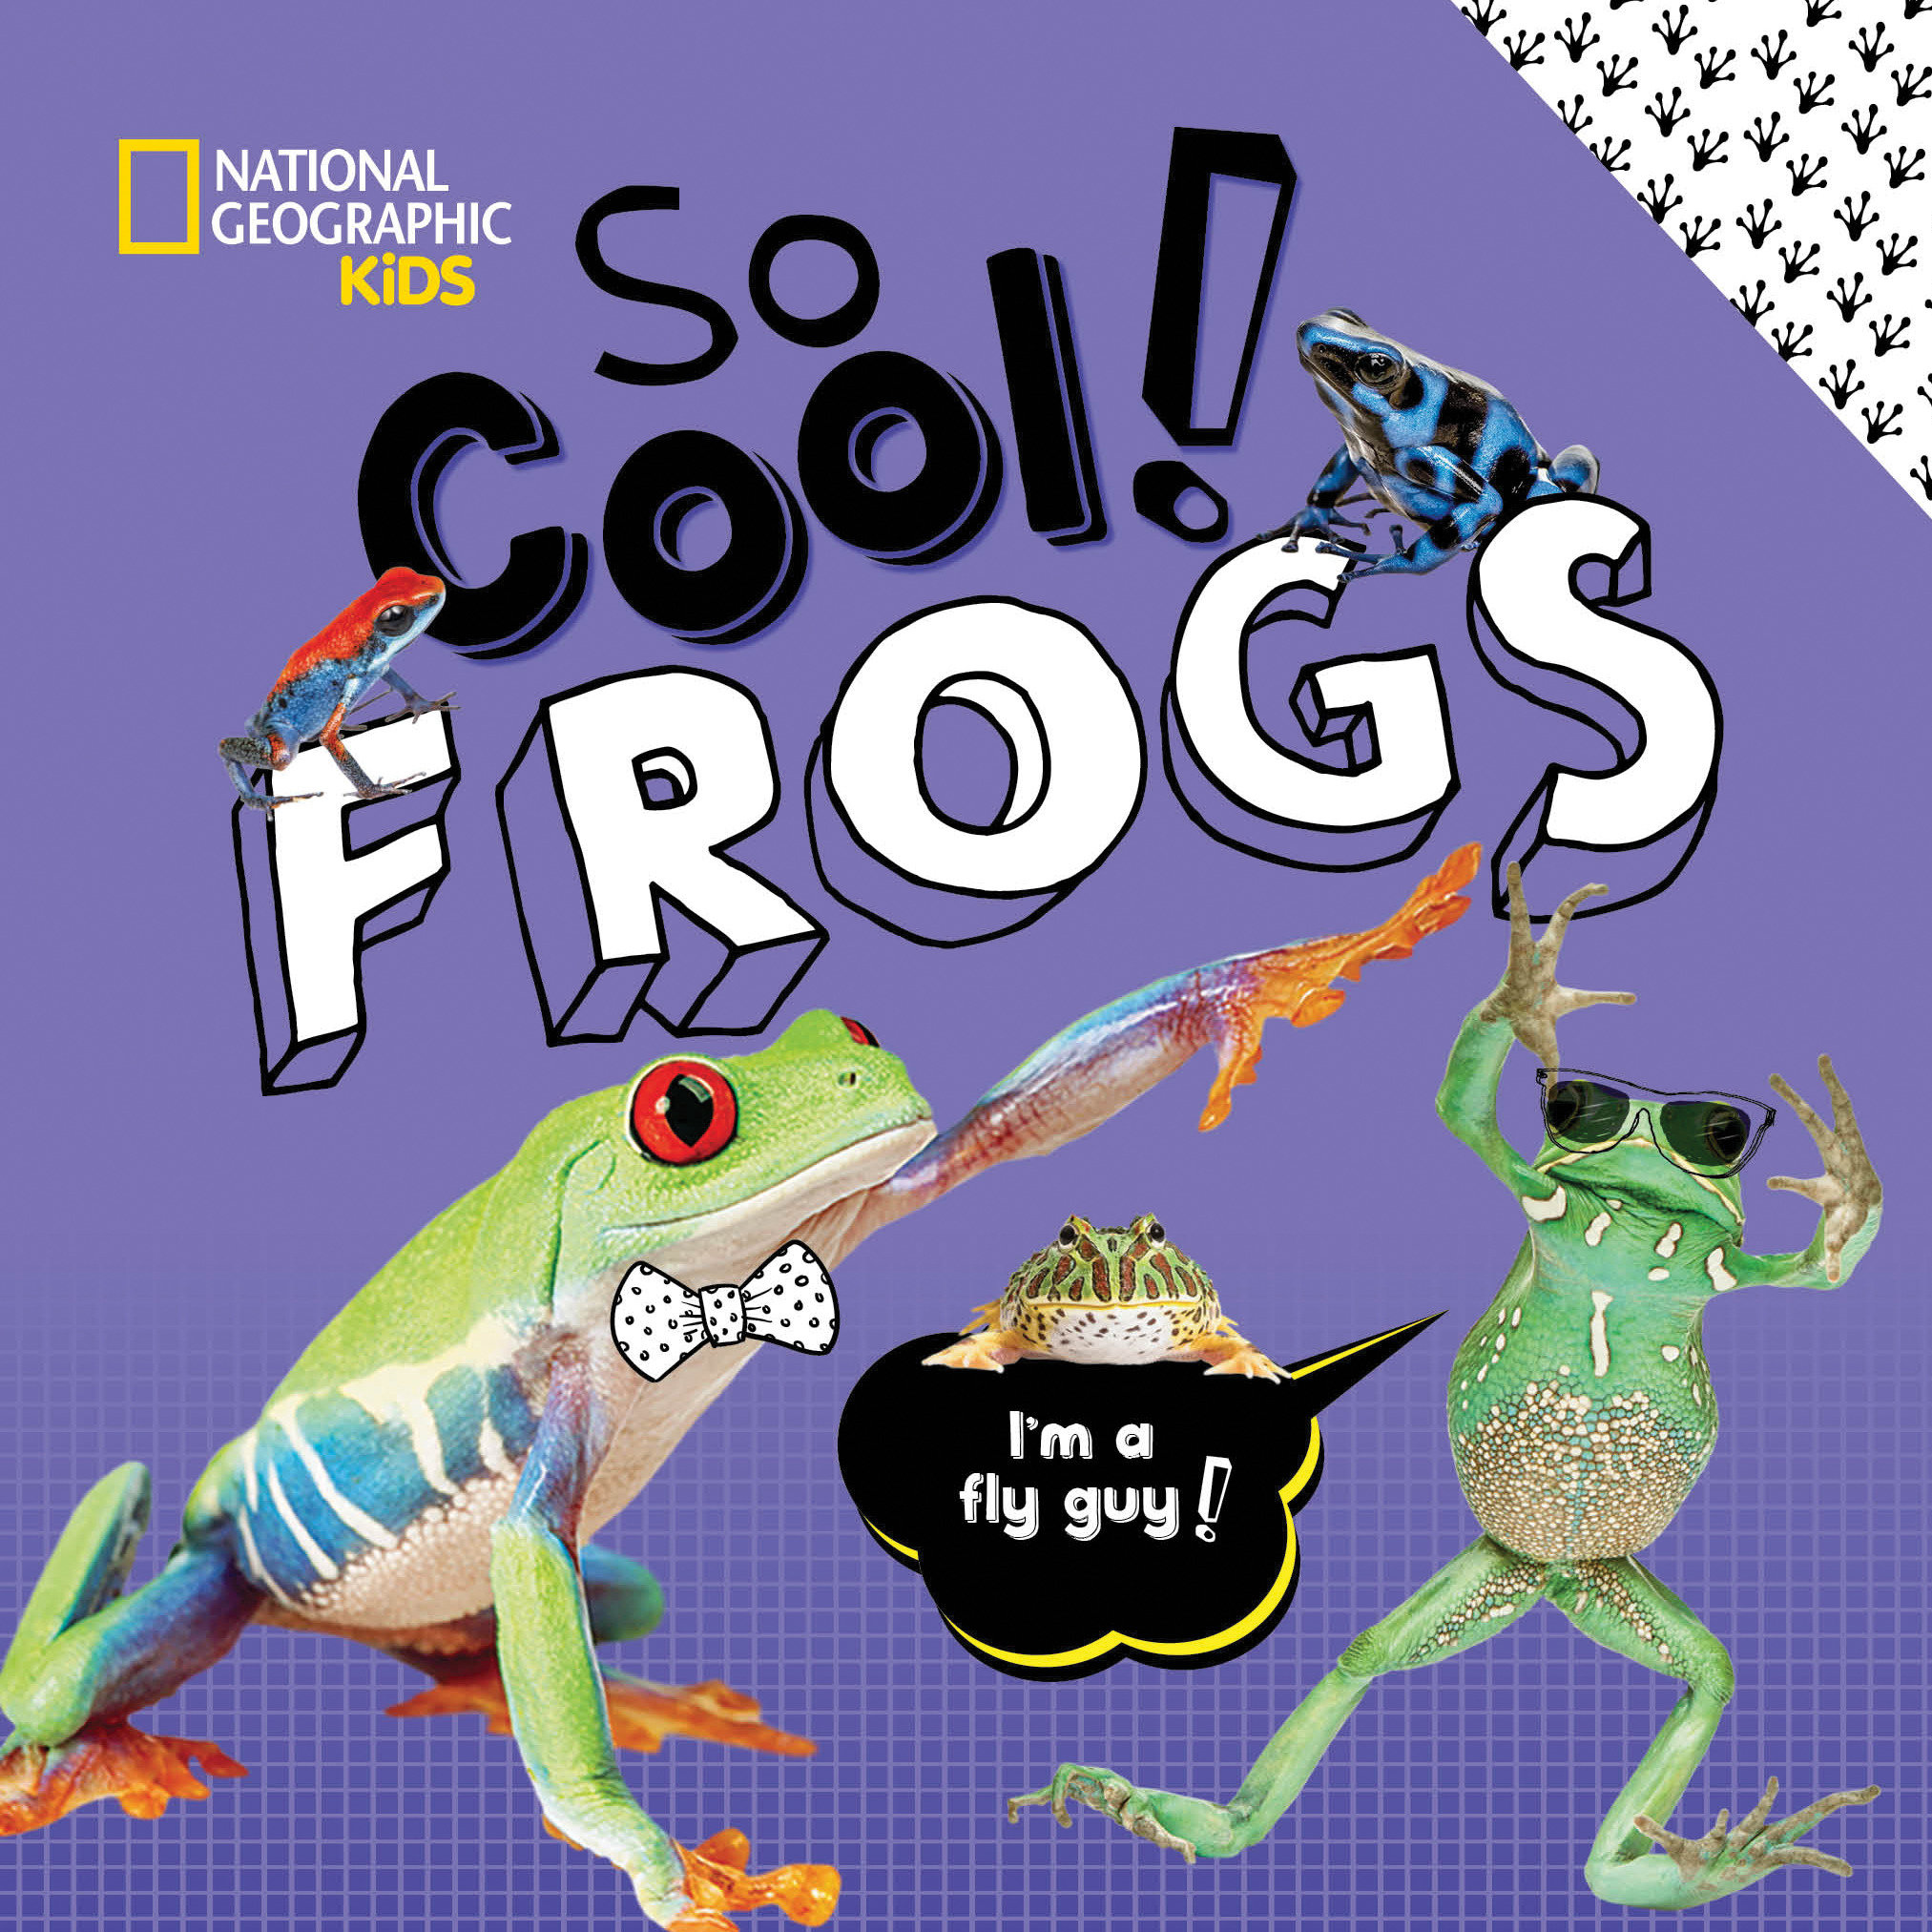 So Cool! Frogs (Hardcover Book)